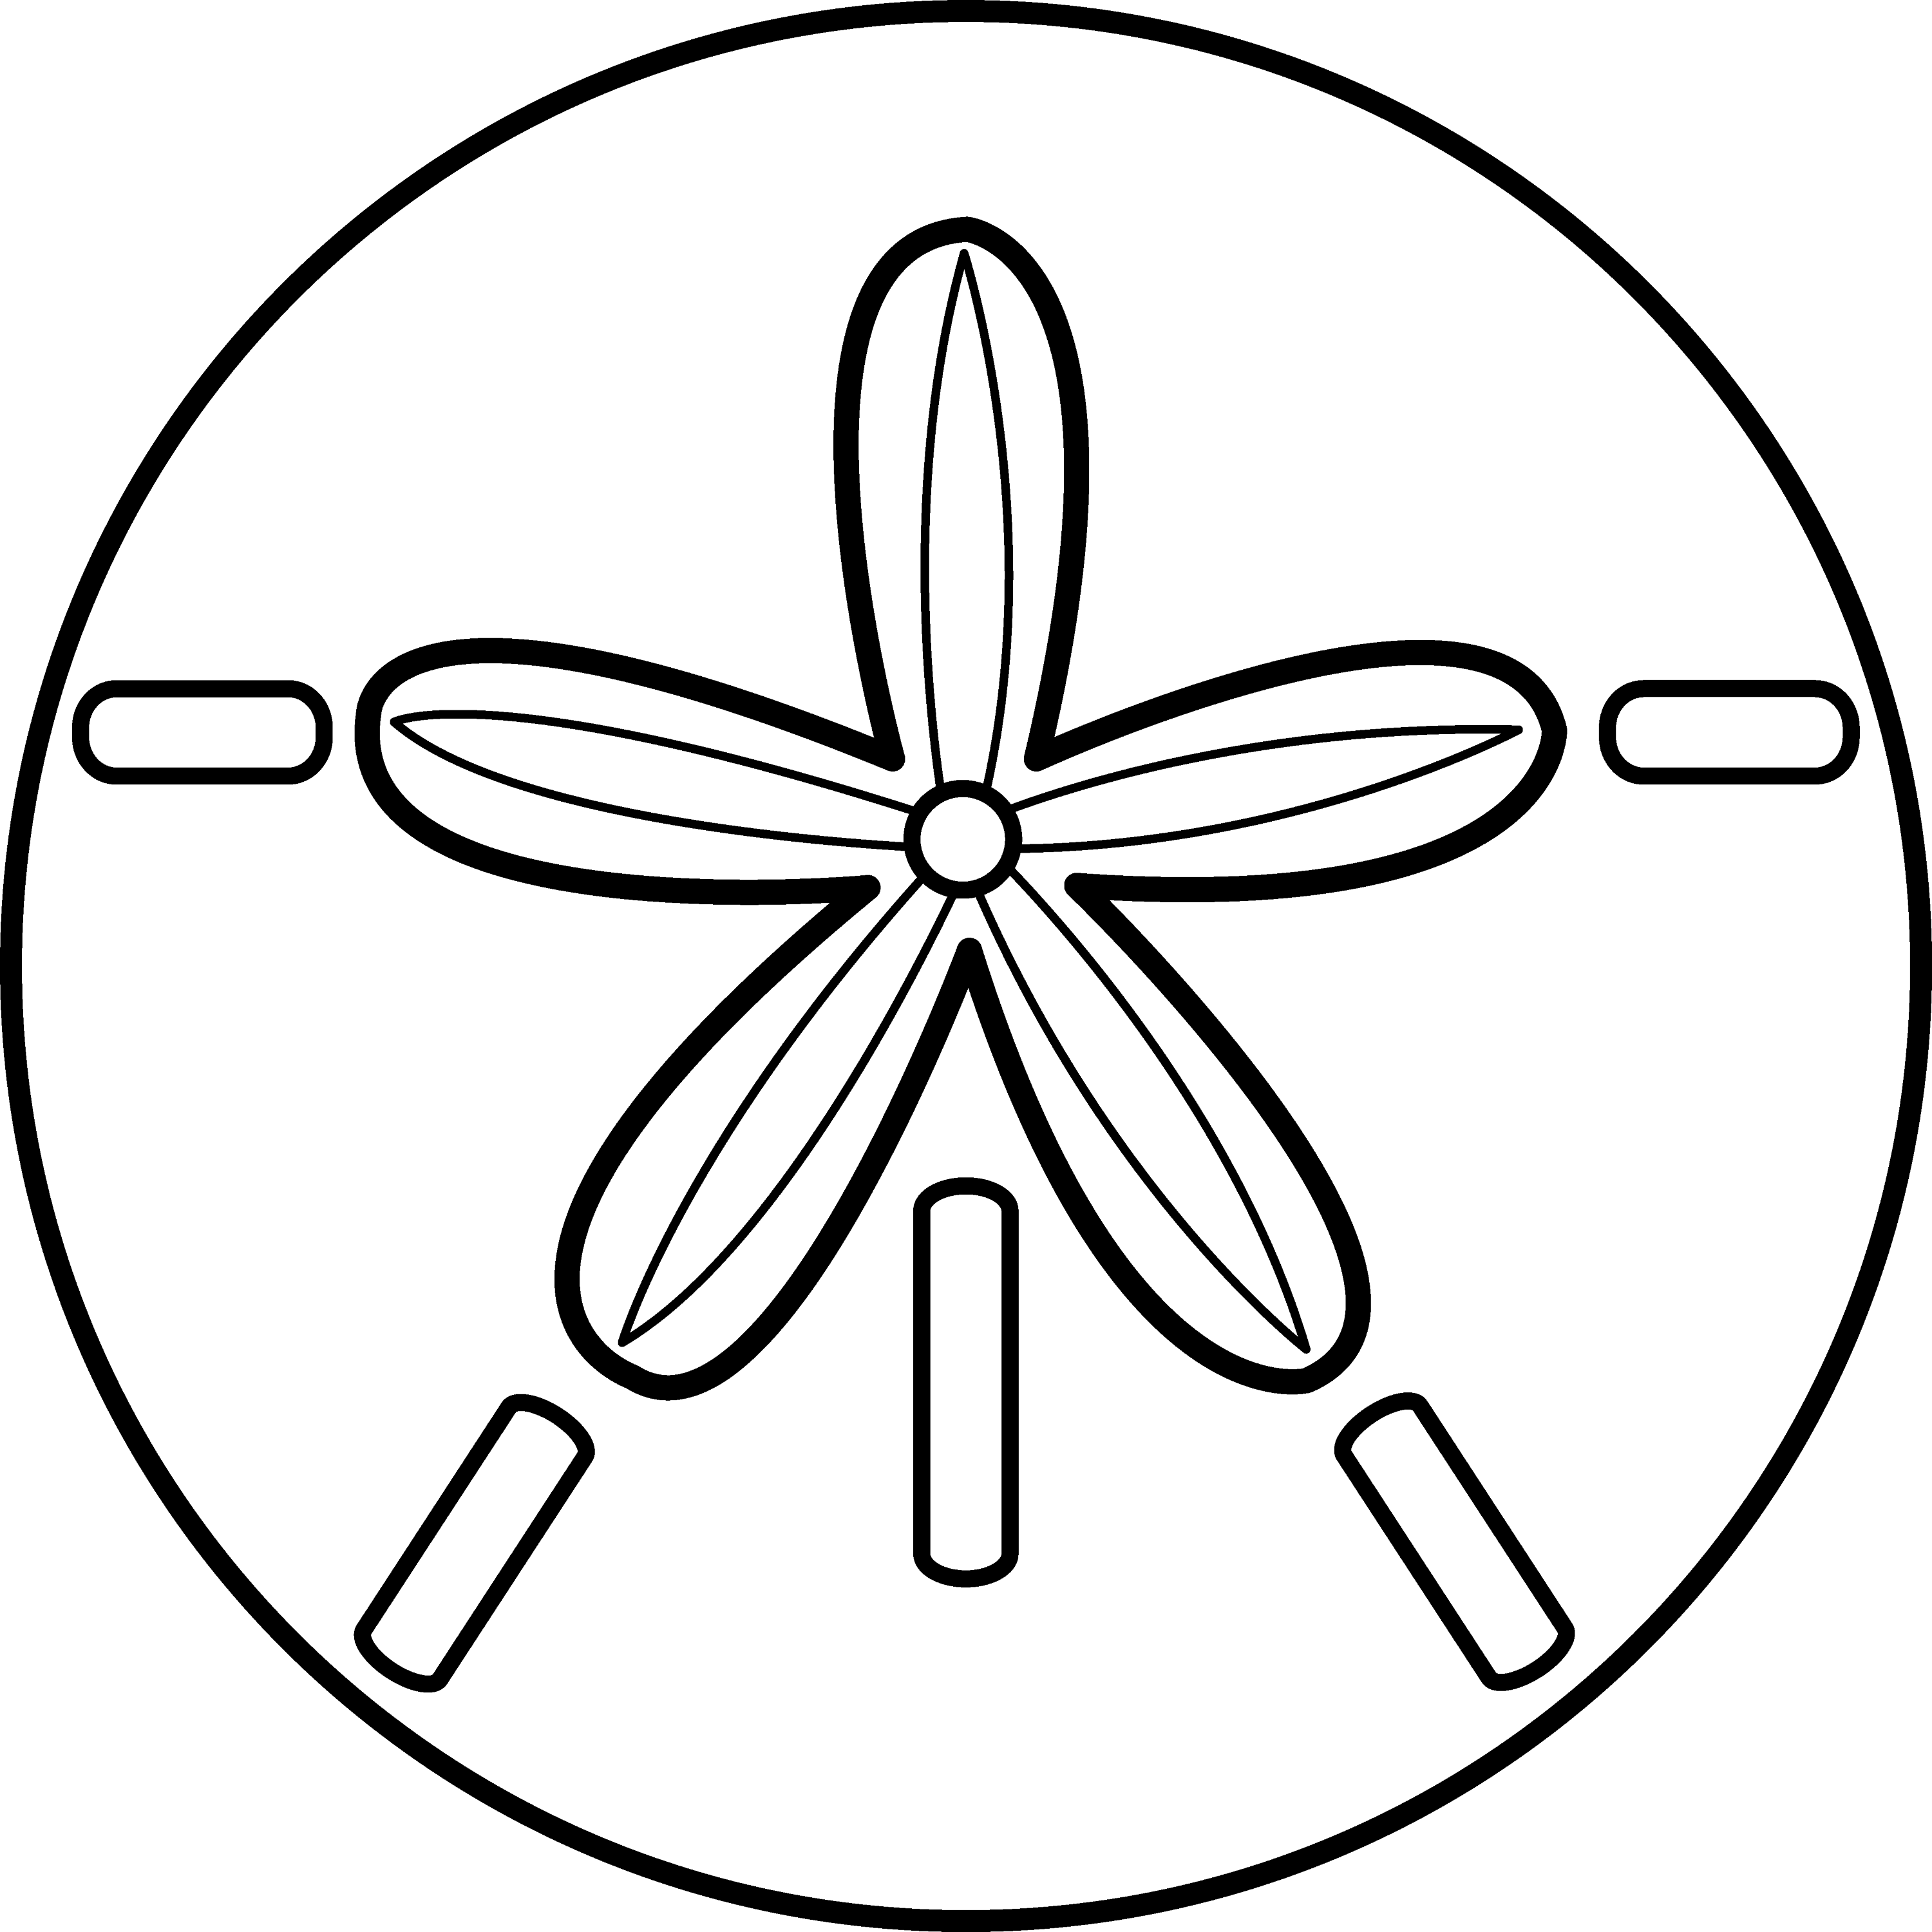 Sand Dollar Coloring Pages